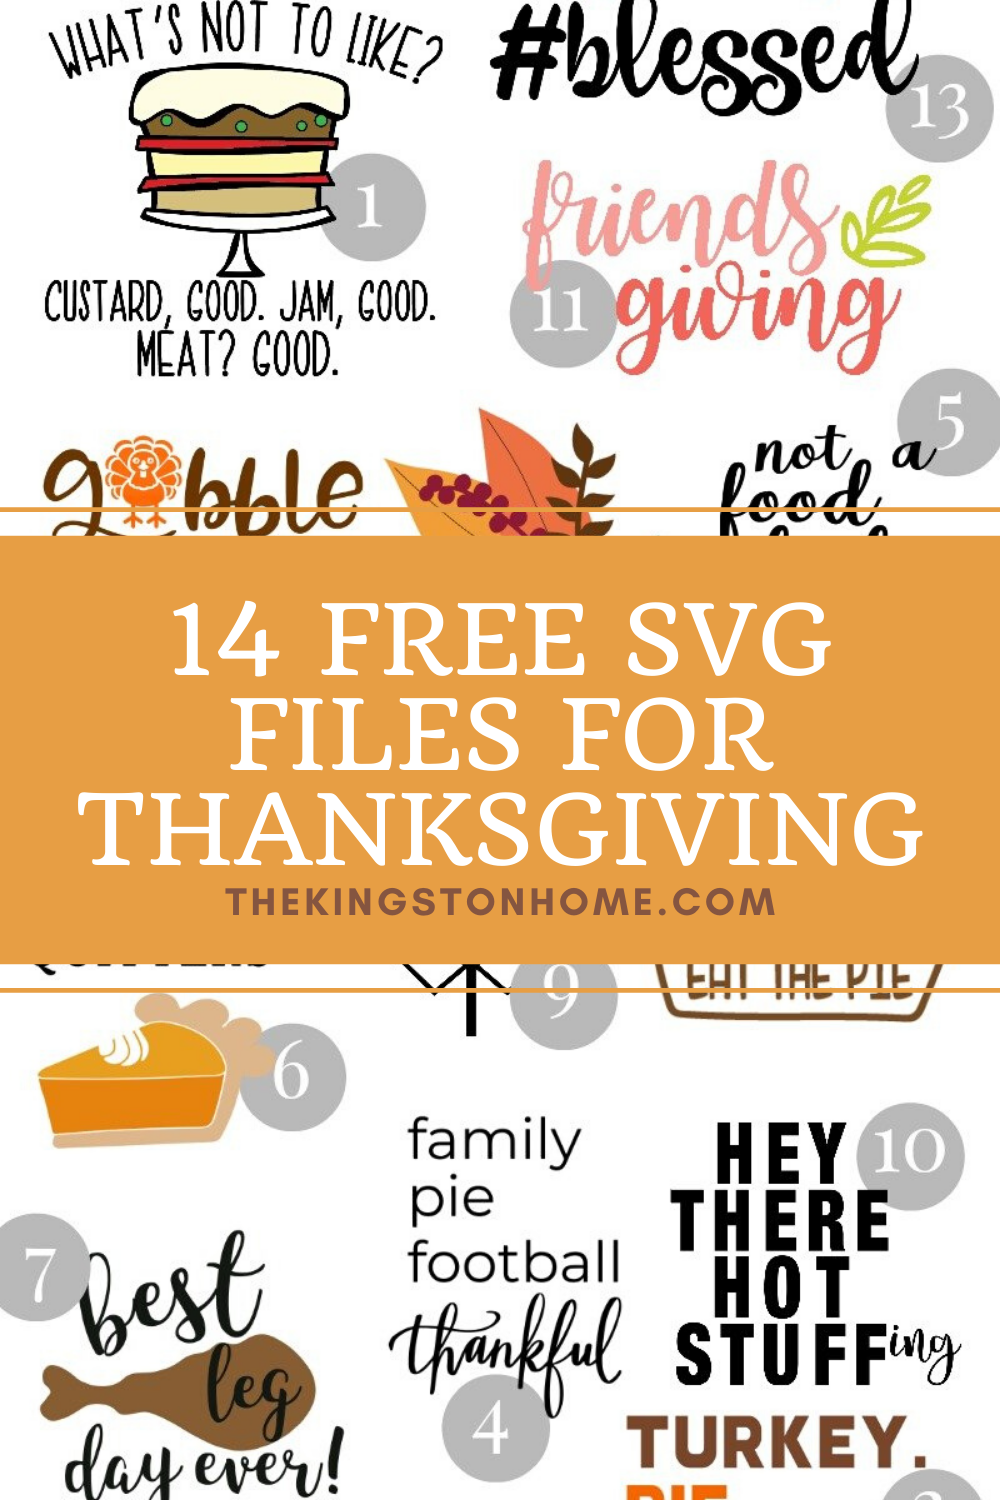 Free SVG Files for Thanksgiving - The Kingston Home